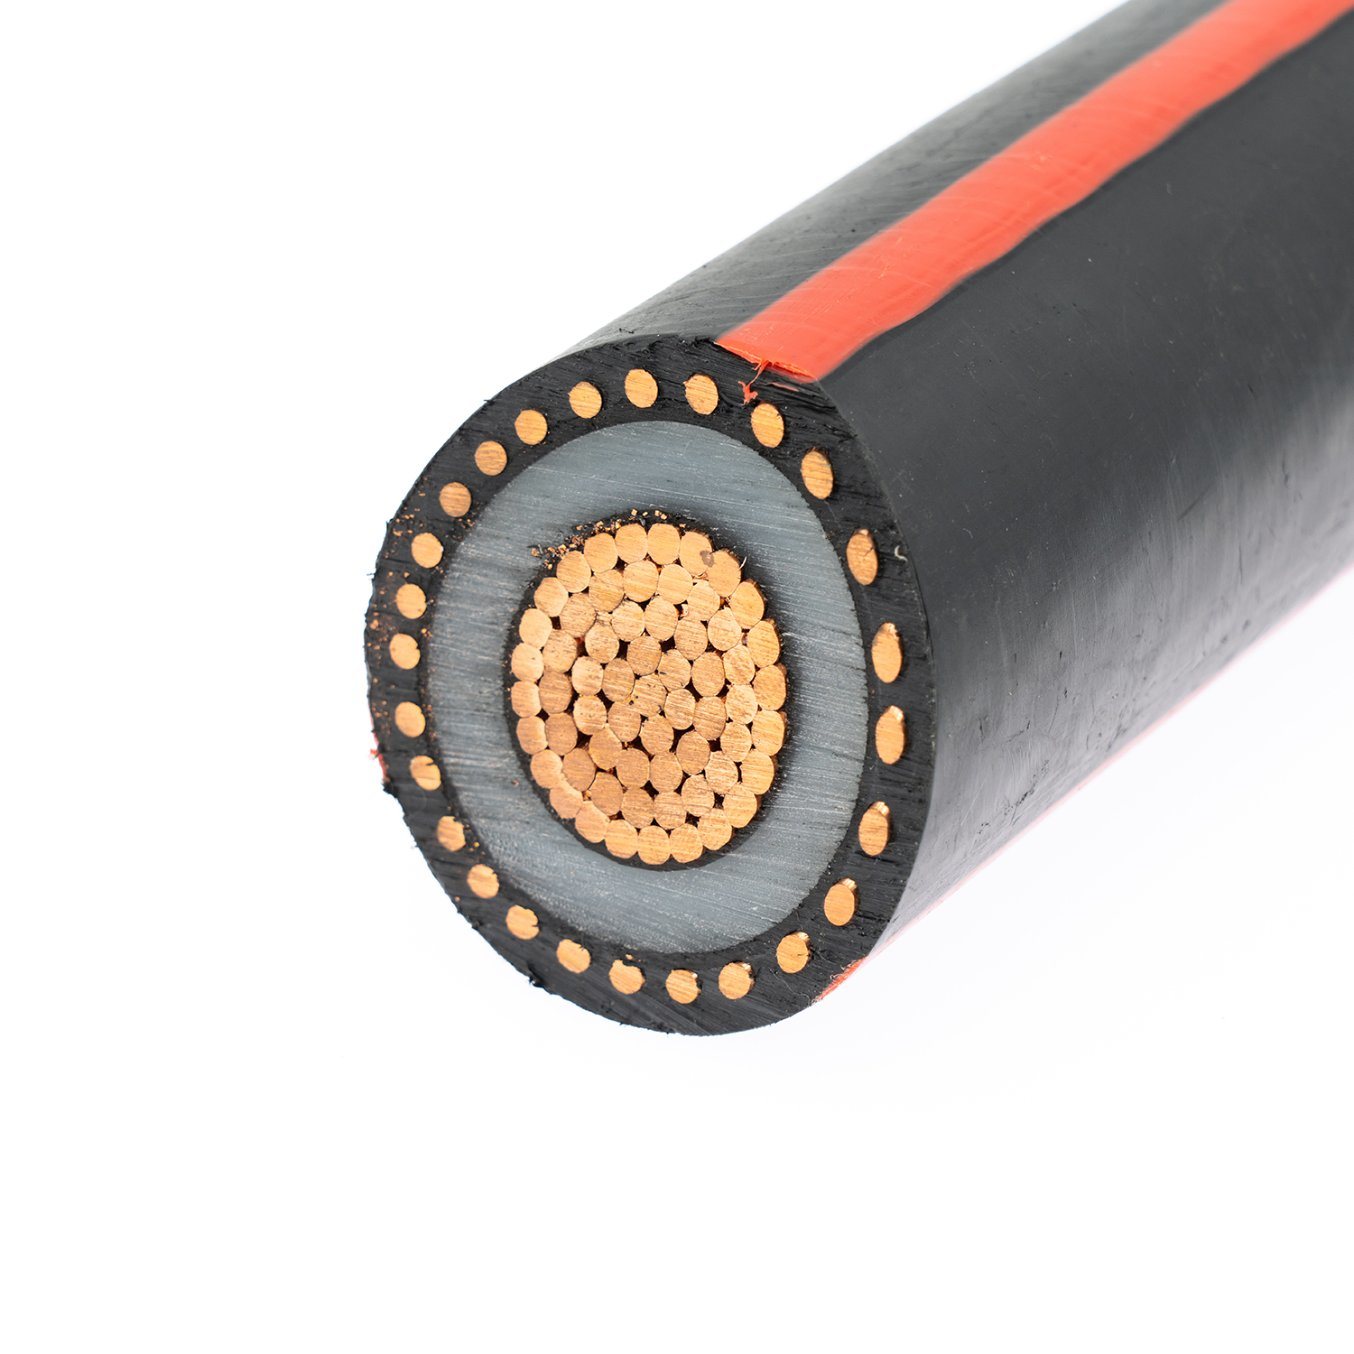 UL and CSA 28kv Cu 100% Epr One-Third Neutral LLDPE Primary Underground Power Cable 750mcm